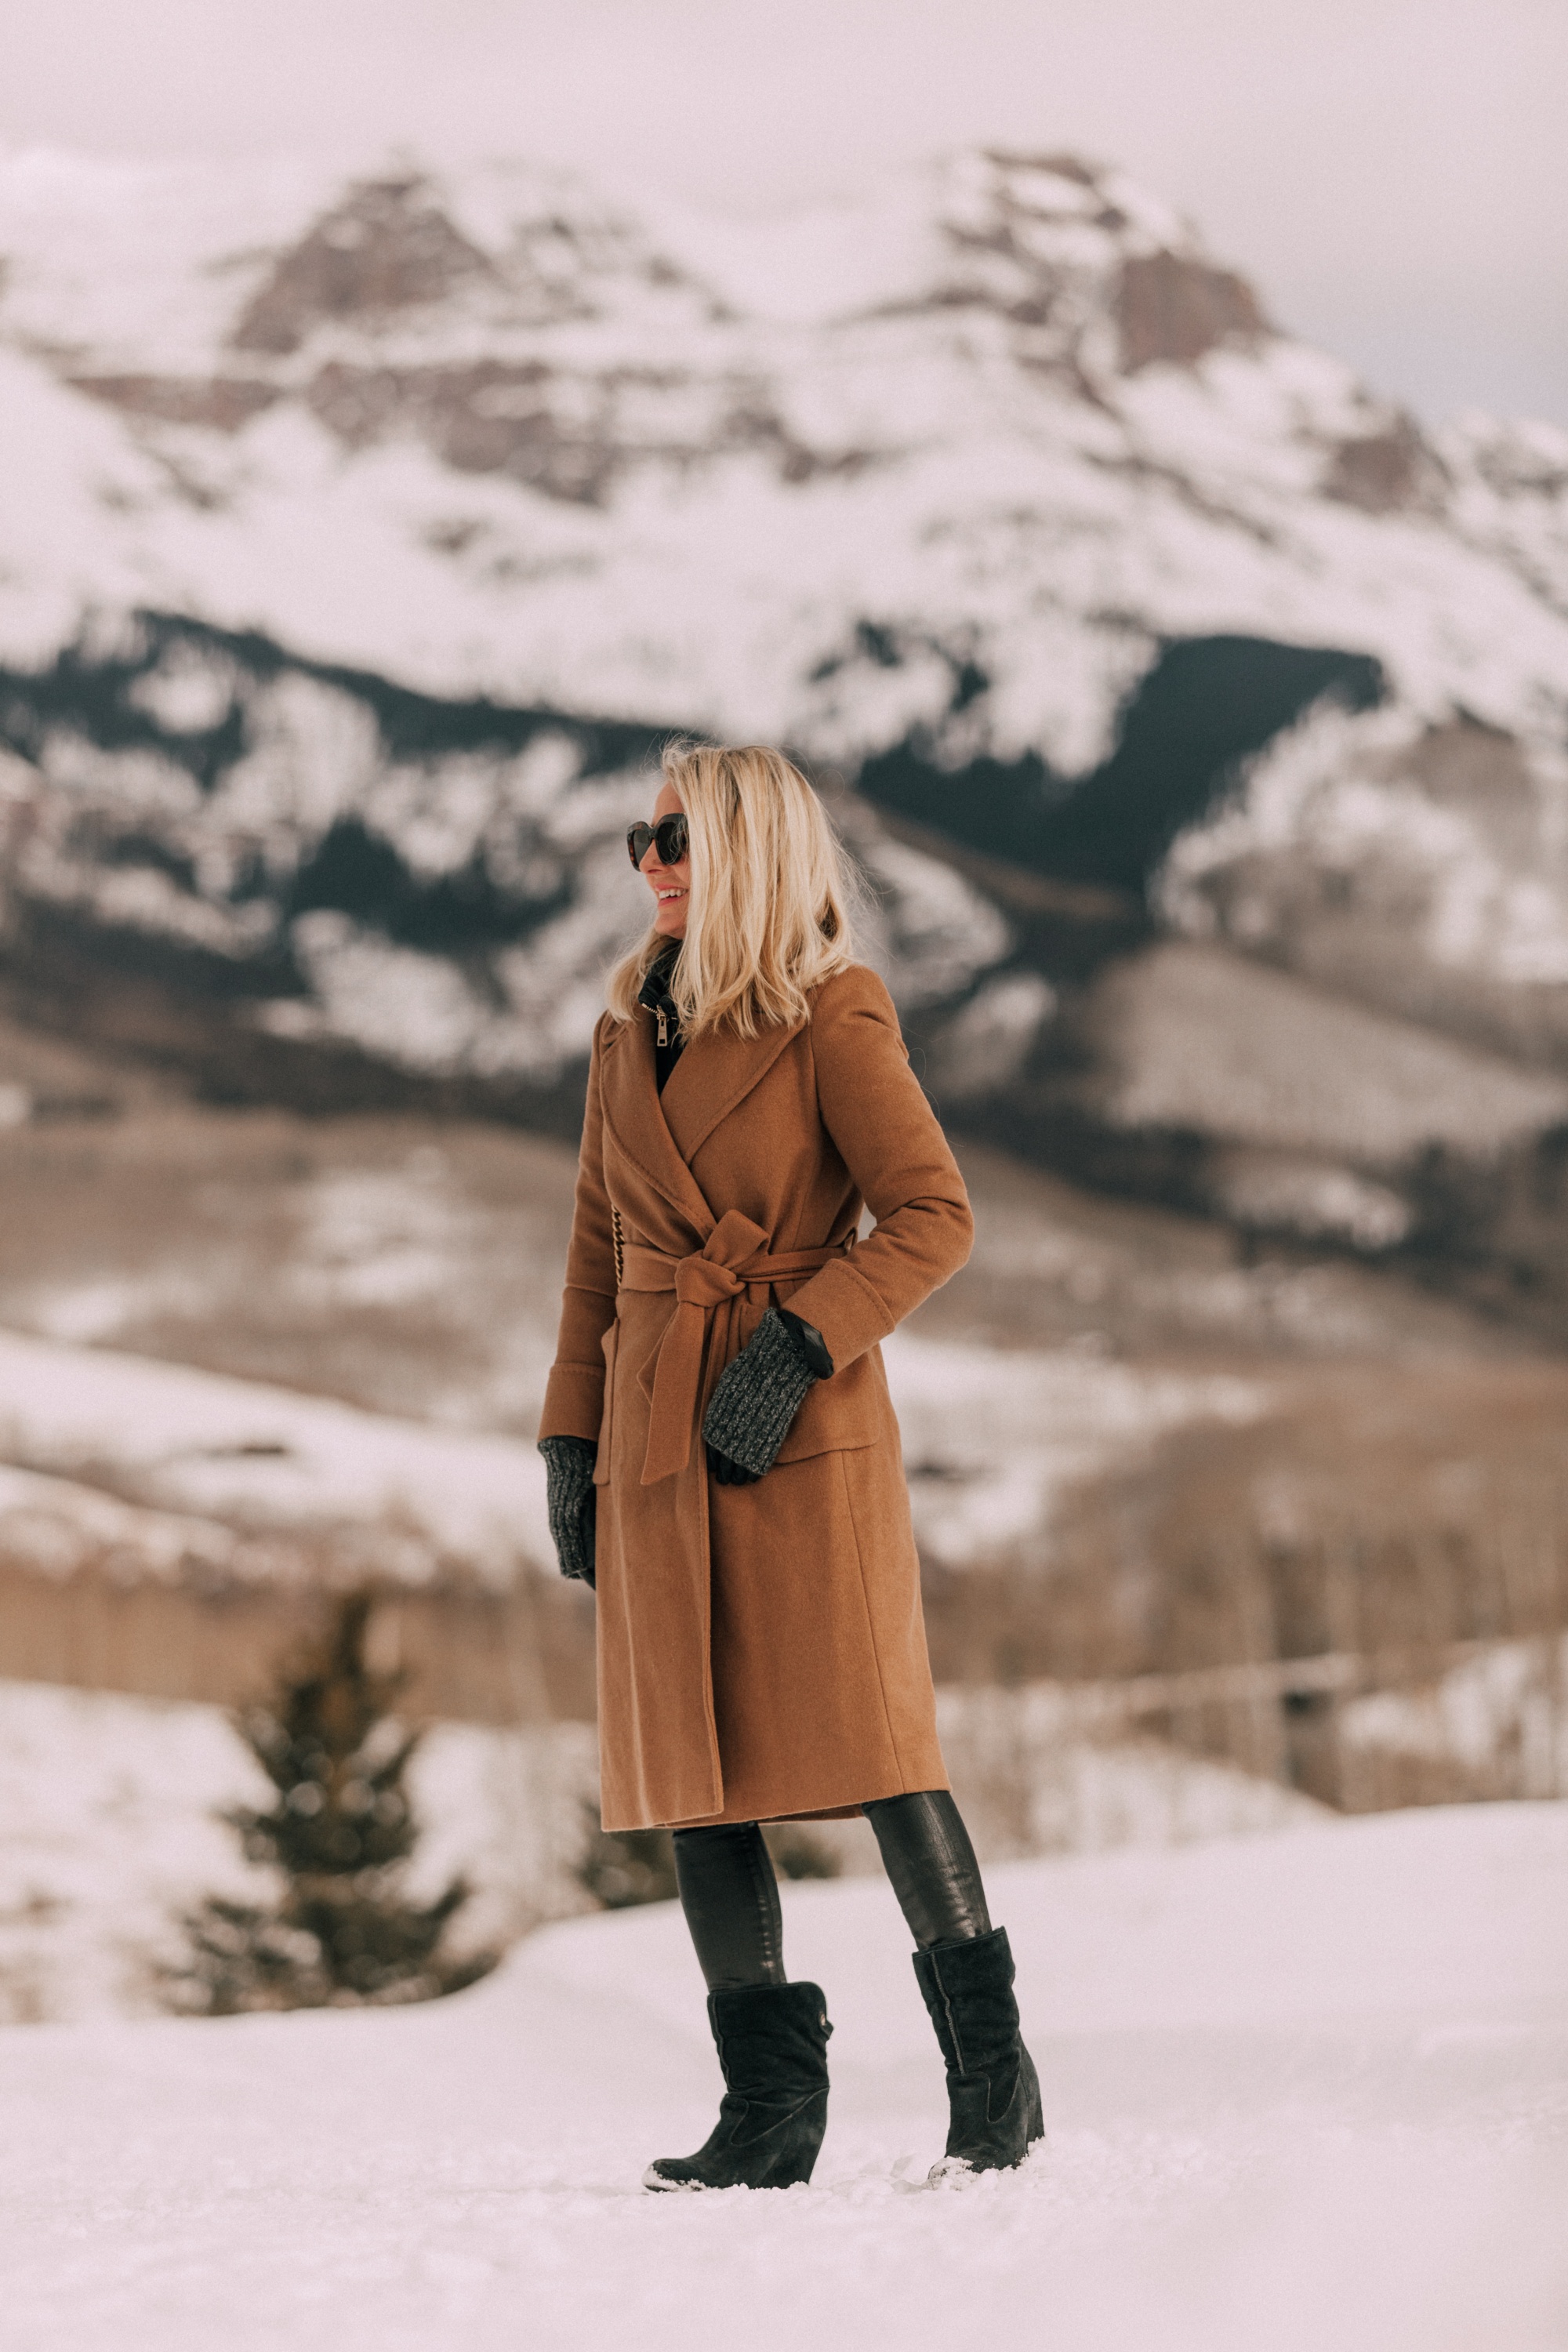 How To Layer Your Clothes, Fashion blogger Erin Busbee of BusbeeStyle.com wearing a black turtleneck sweater with Citizens of Humanity Rocket leatherette skinny jeans, Ugg wedge boots, camel wool coat by Mackage, and Herno puffer coat in Telluride, CO